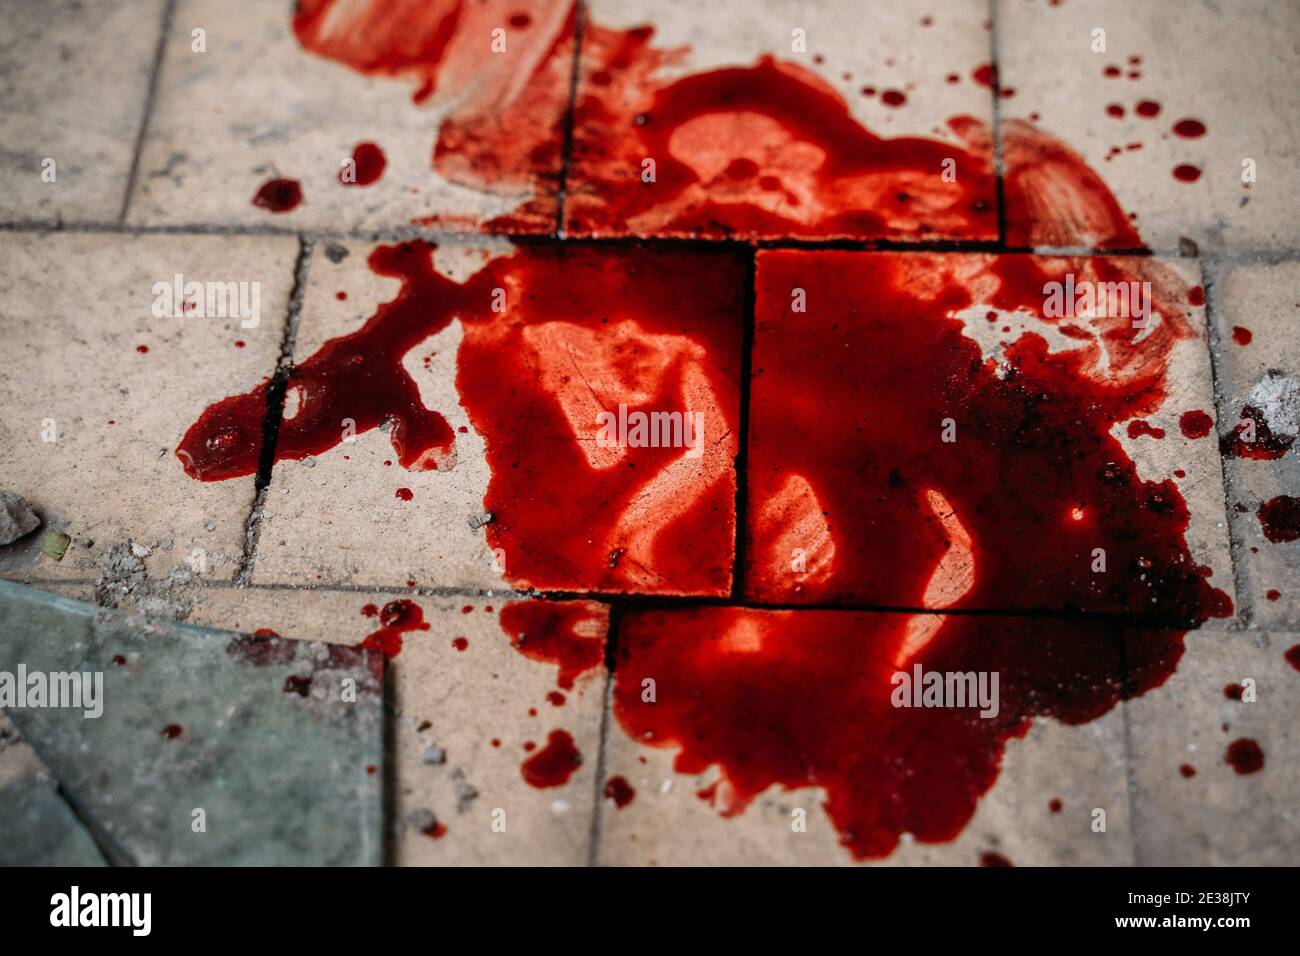 Puddle of blood on dirty tiled floor, concept of victim of violence or murder crime. Stock Photo